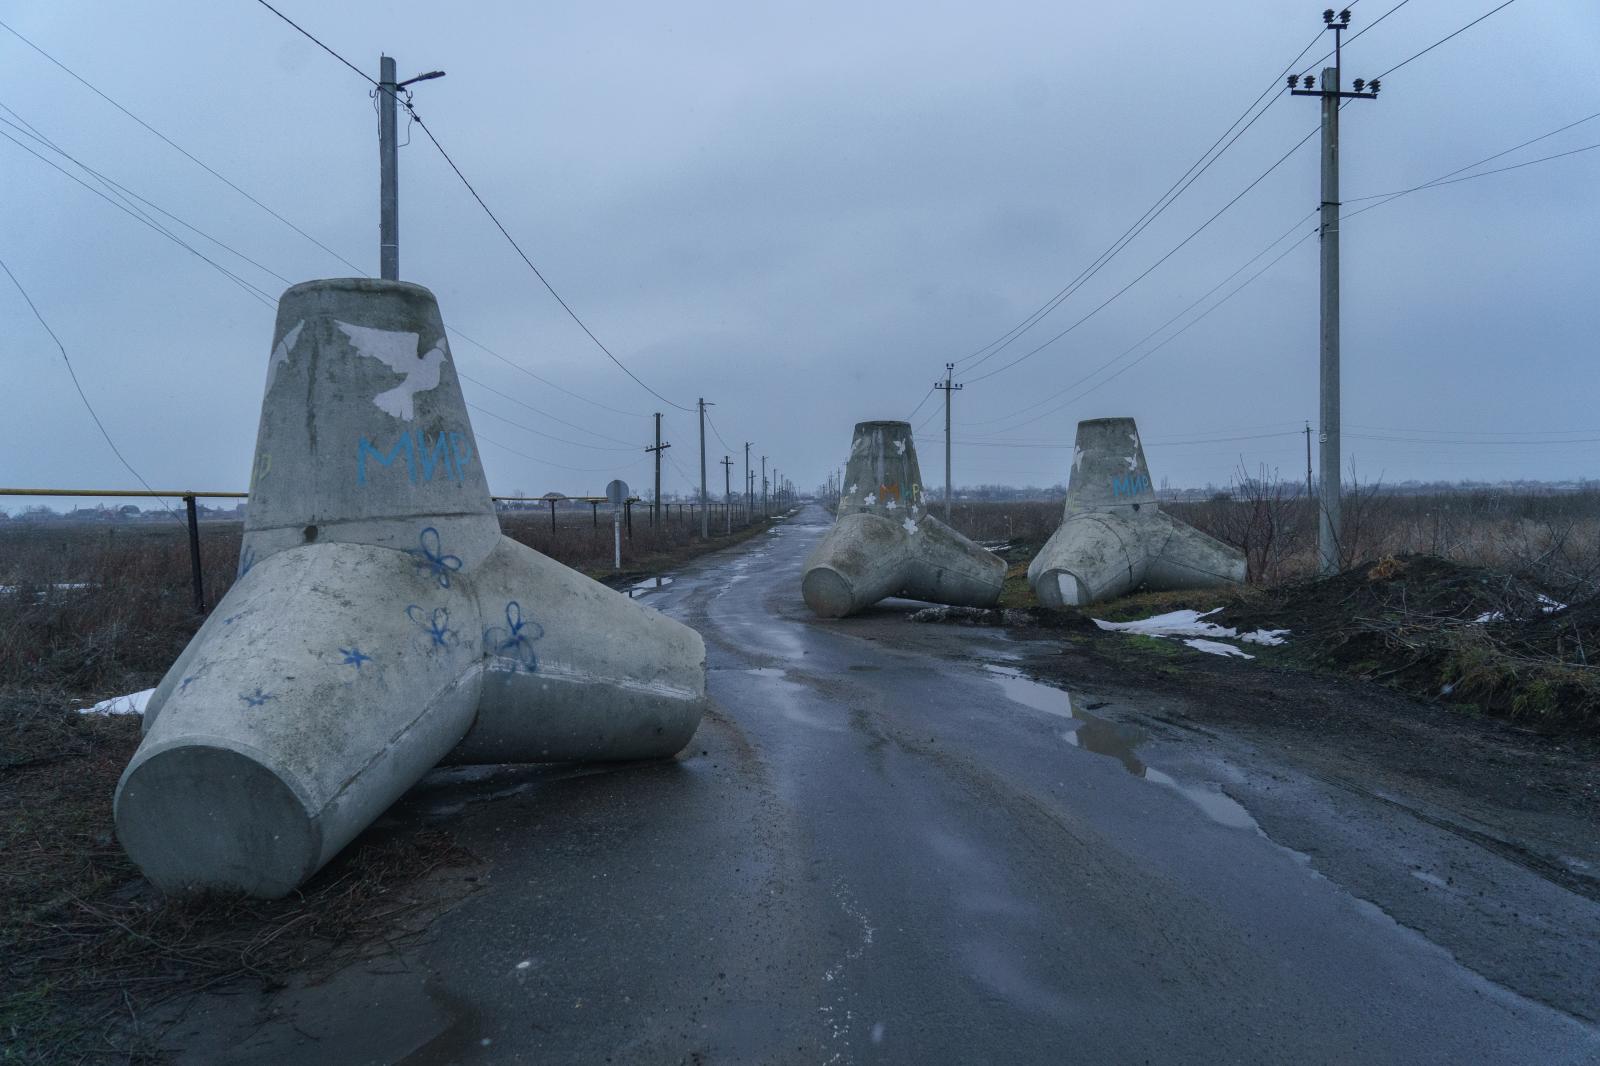 Mariupol before the Russian Invasion in February | Buy this image